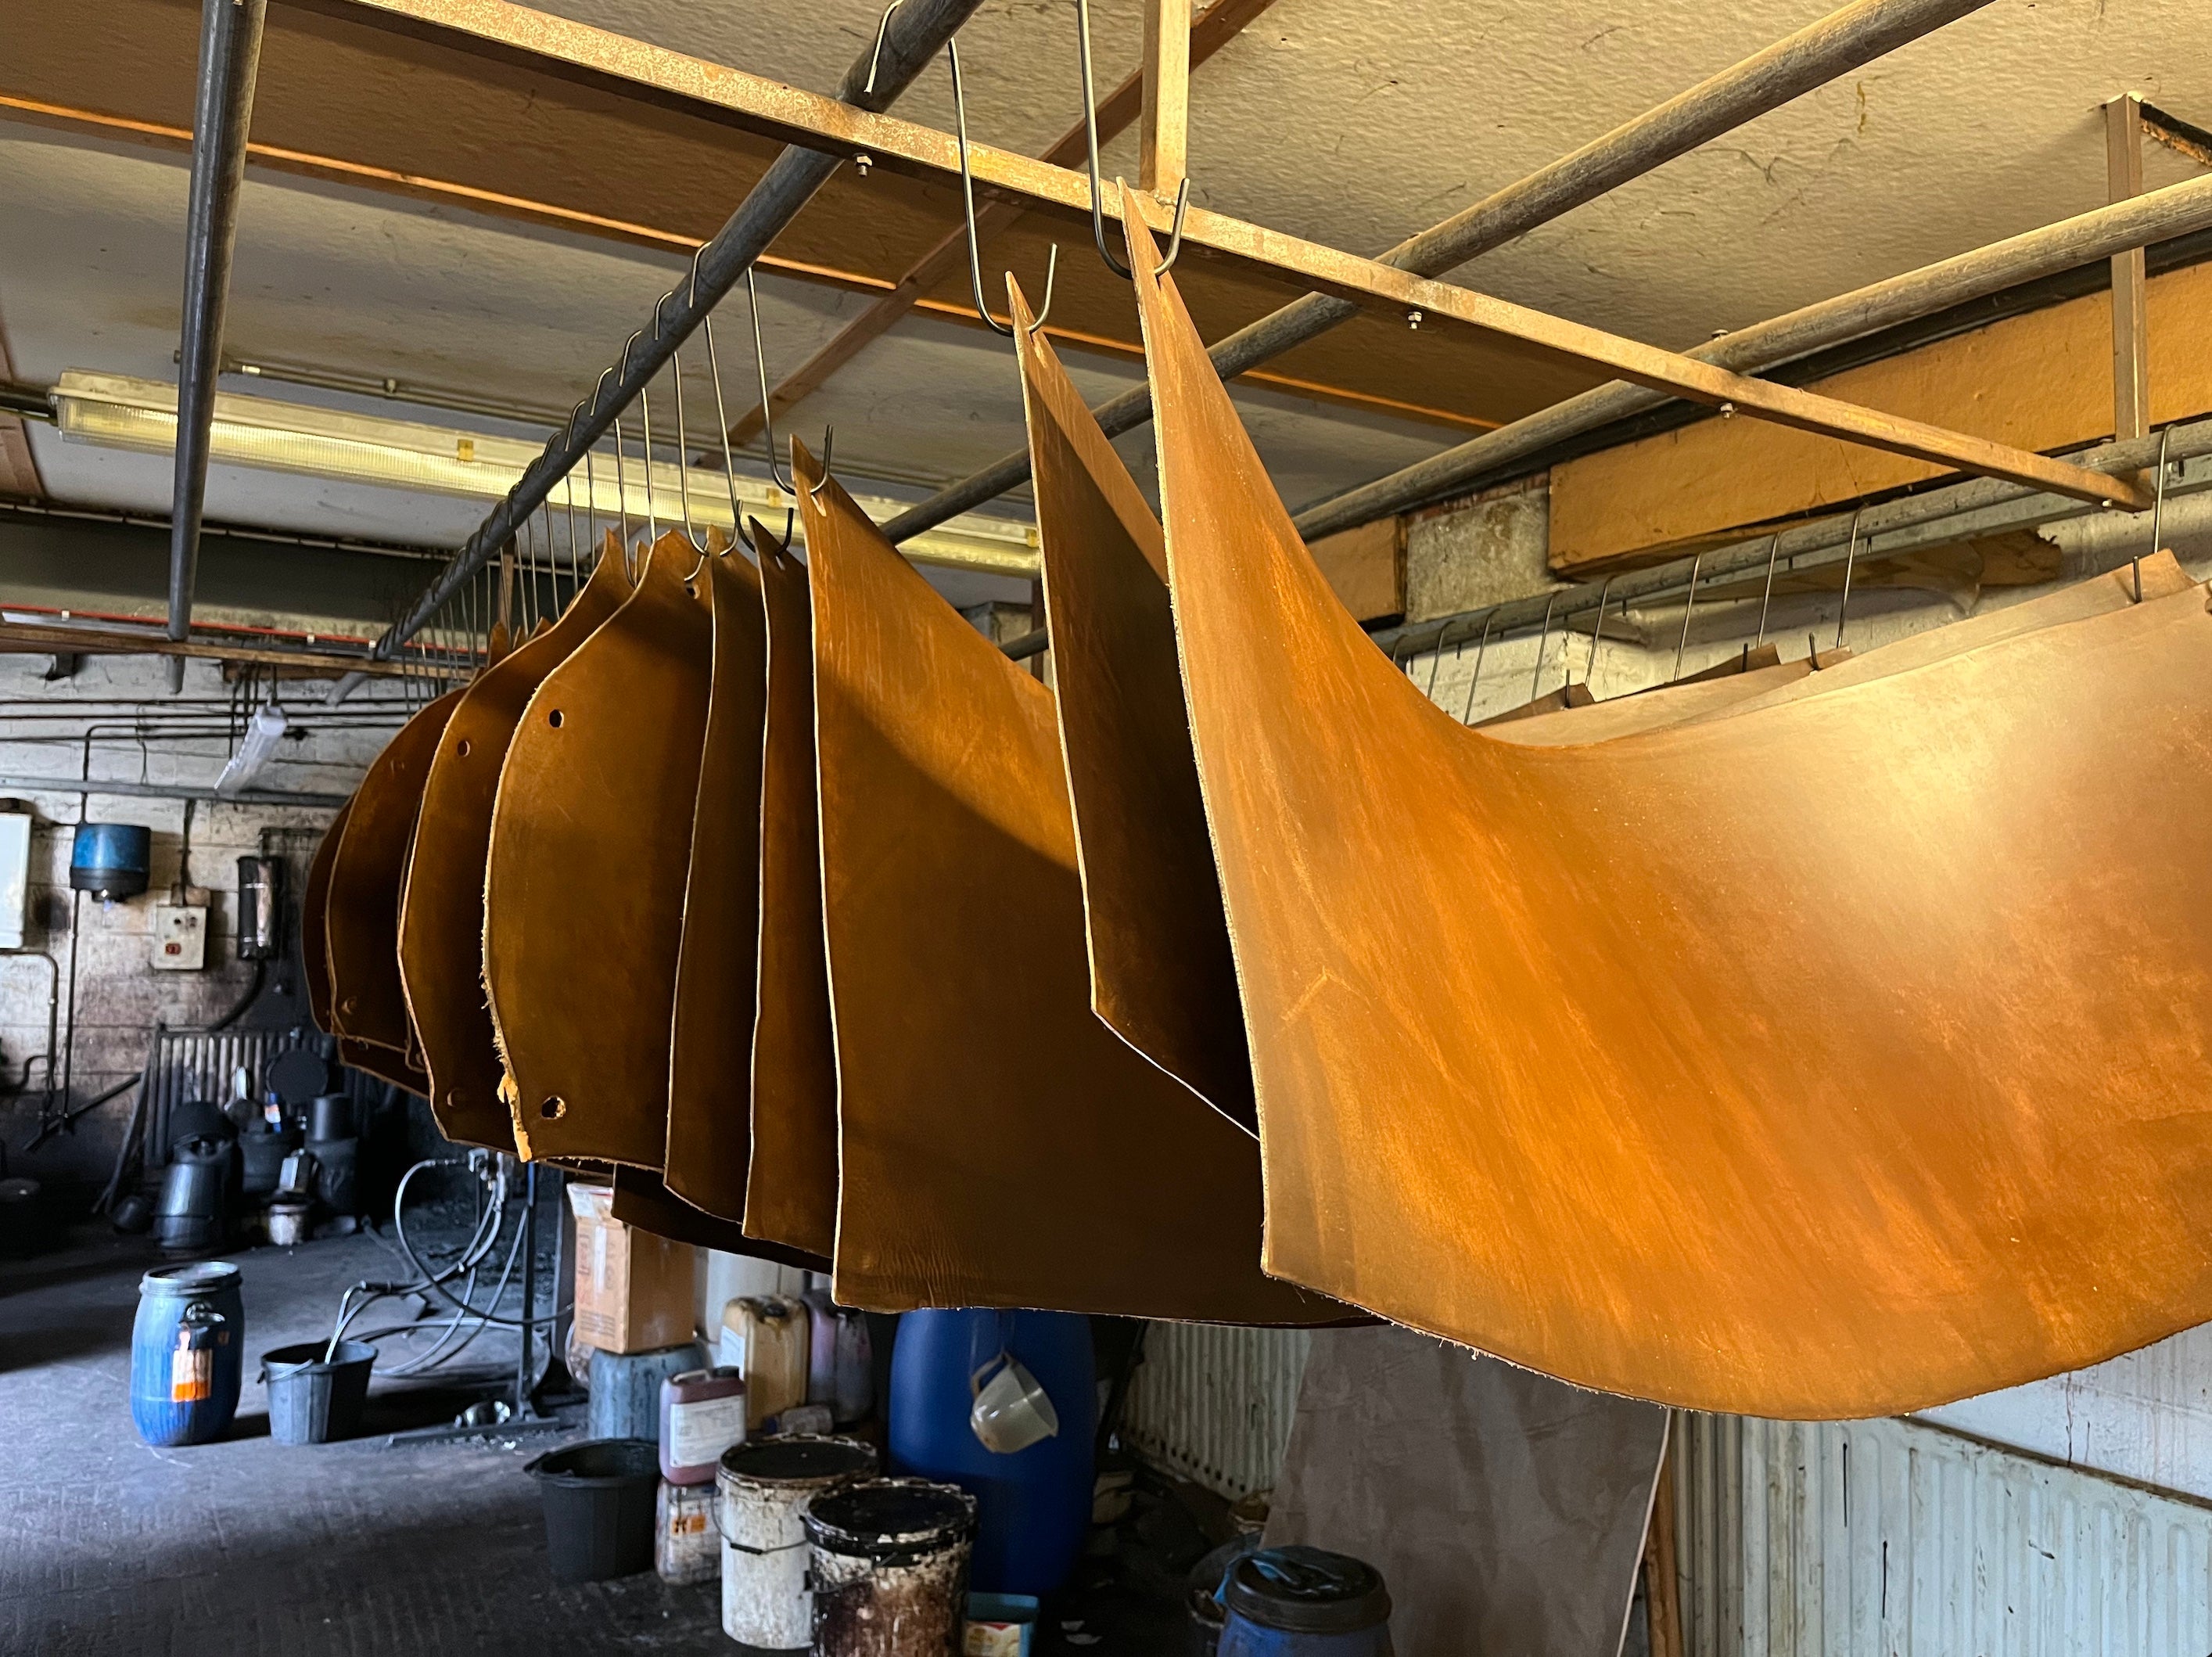 Treated leather hides at tannery